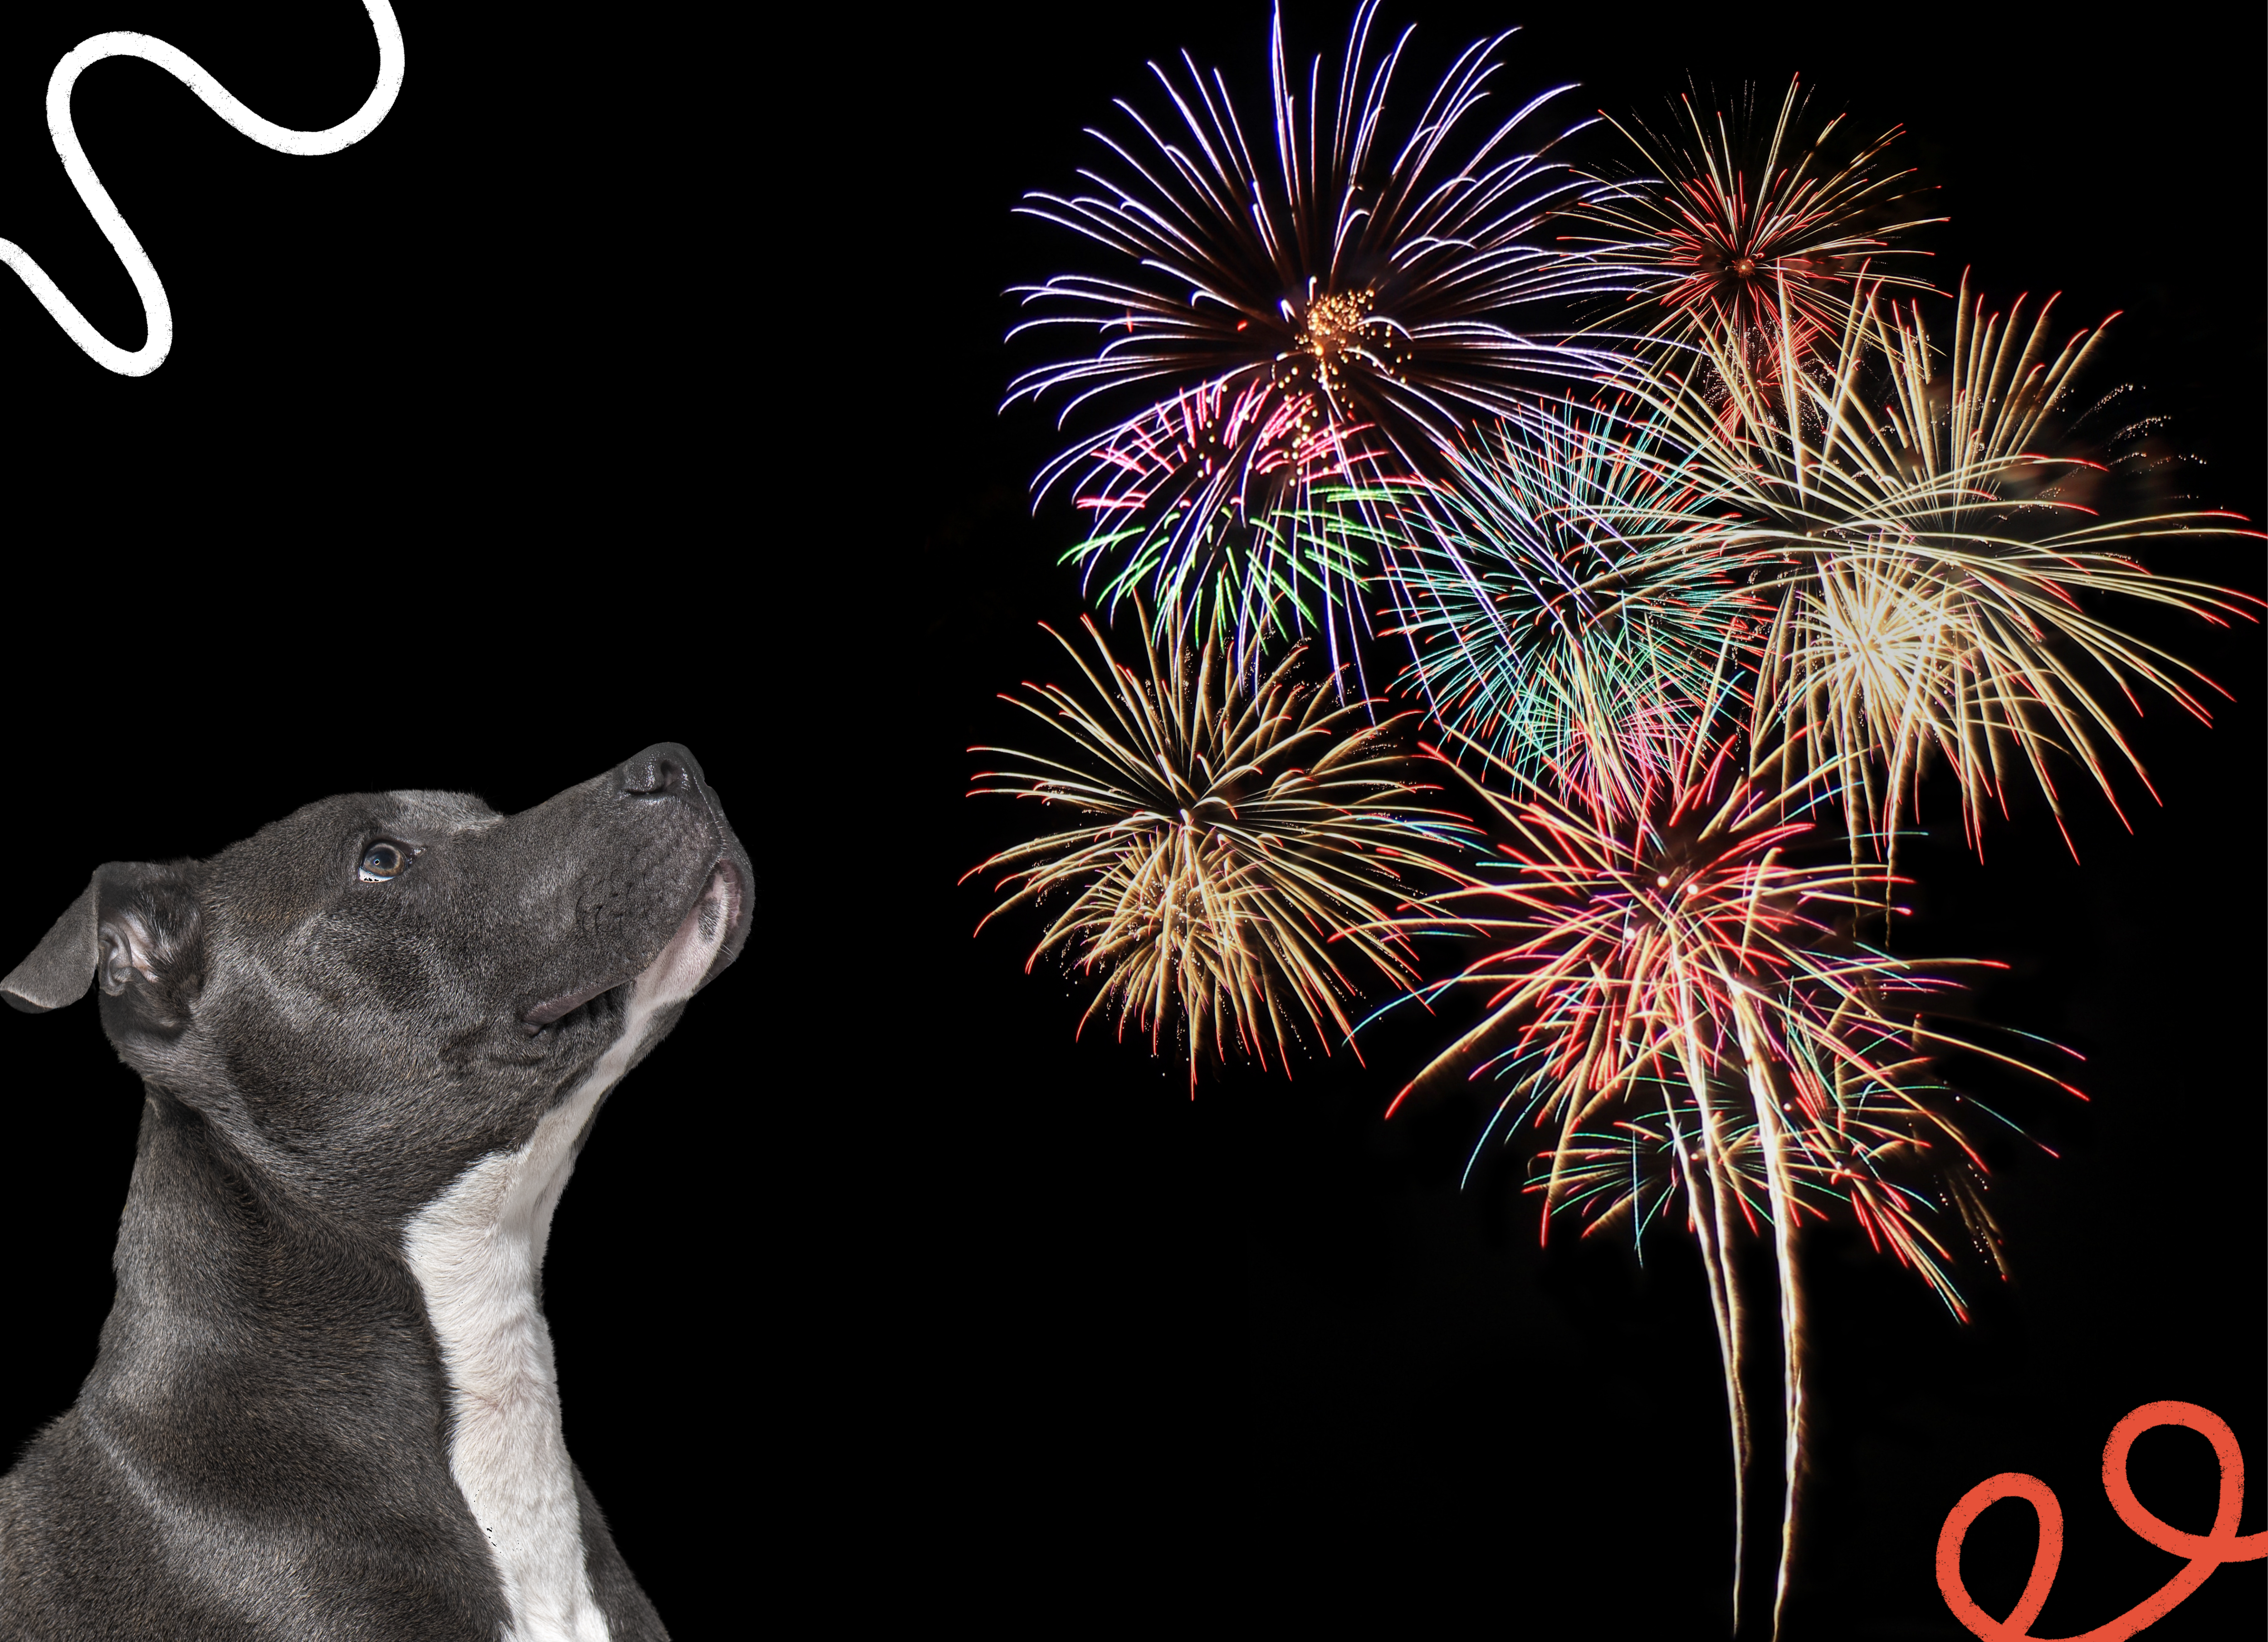 Silver and white pit bull looking up towards brightly colored fireworks